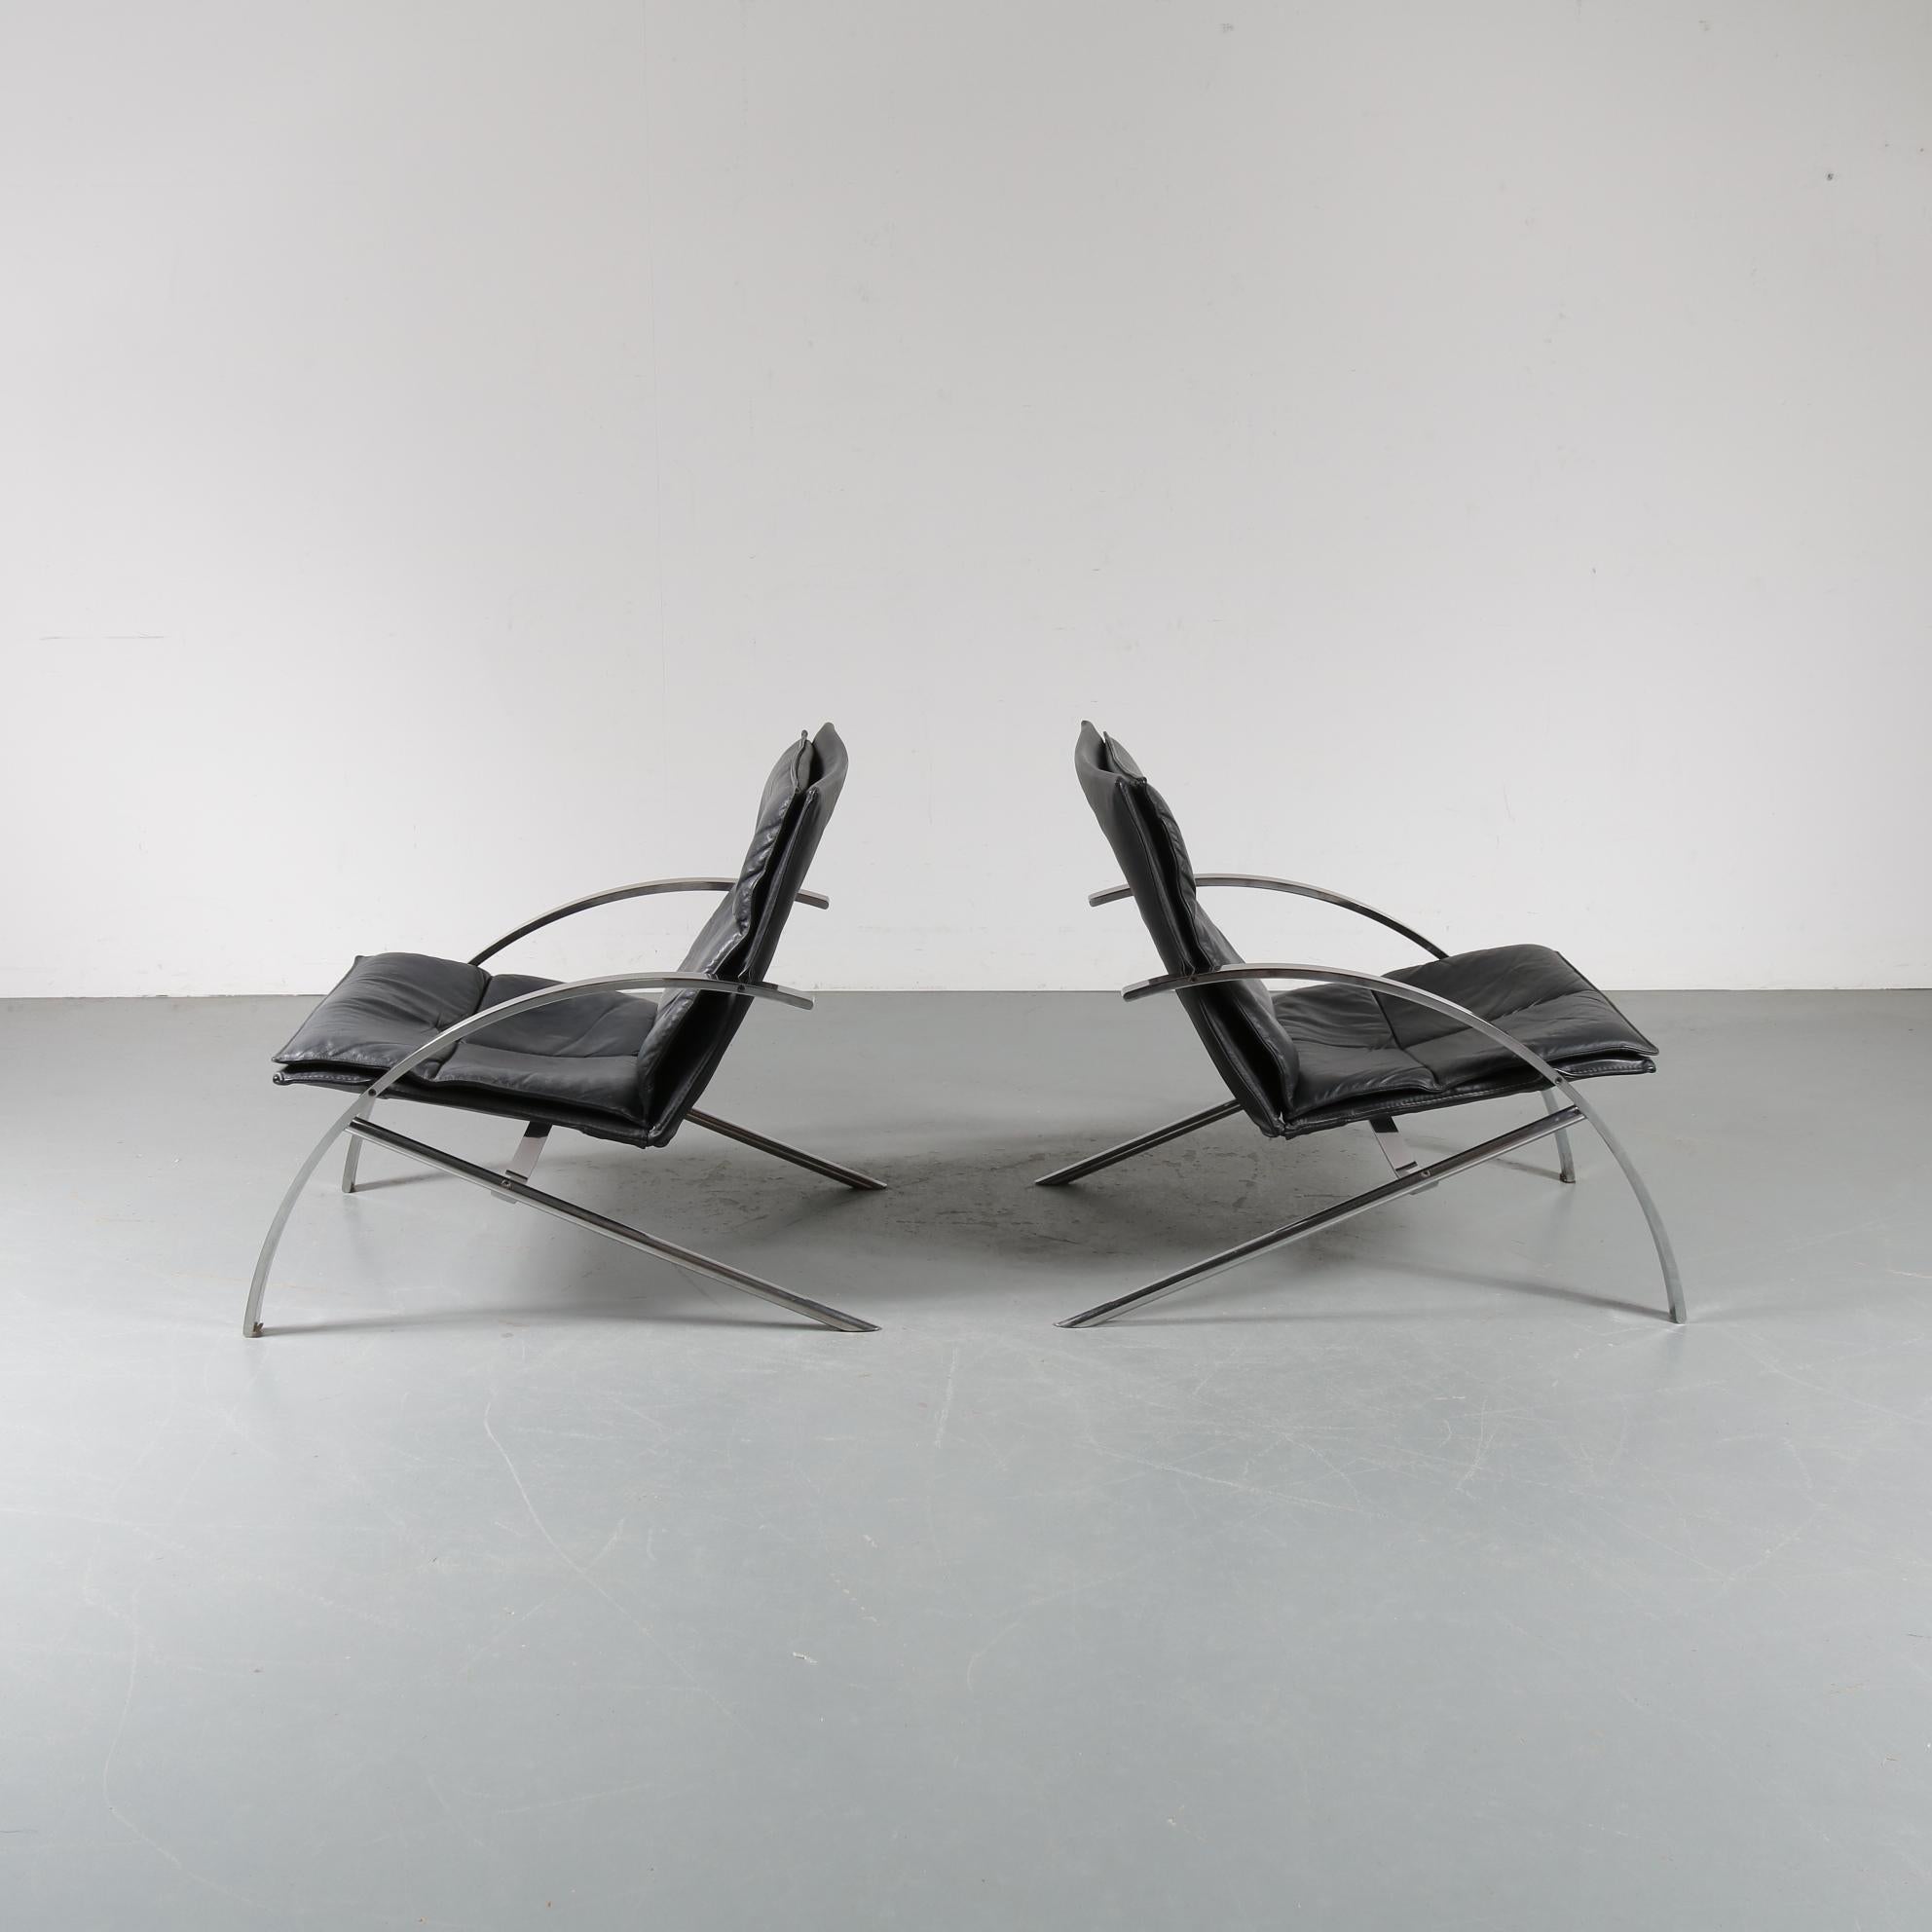 Plated Paul Tuttle “Arco” Chairs for Strässle, Switzerland, 1976